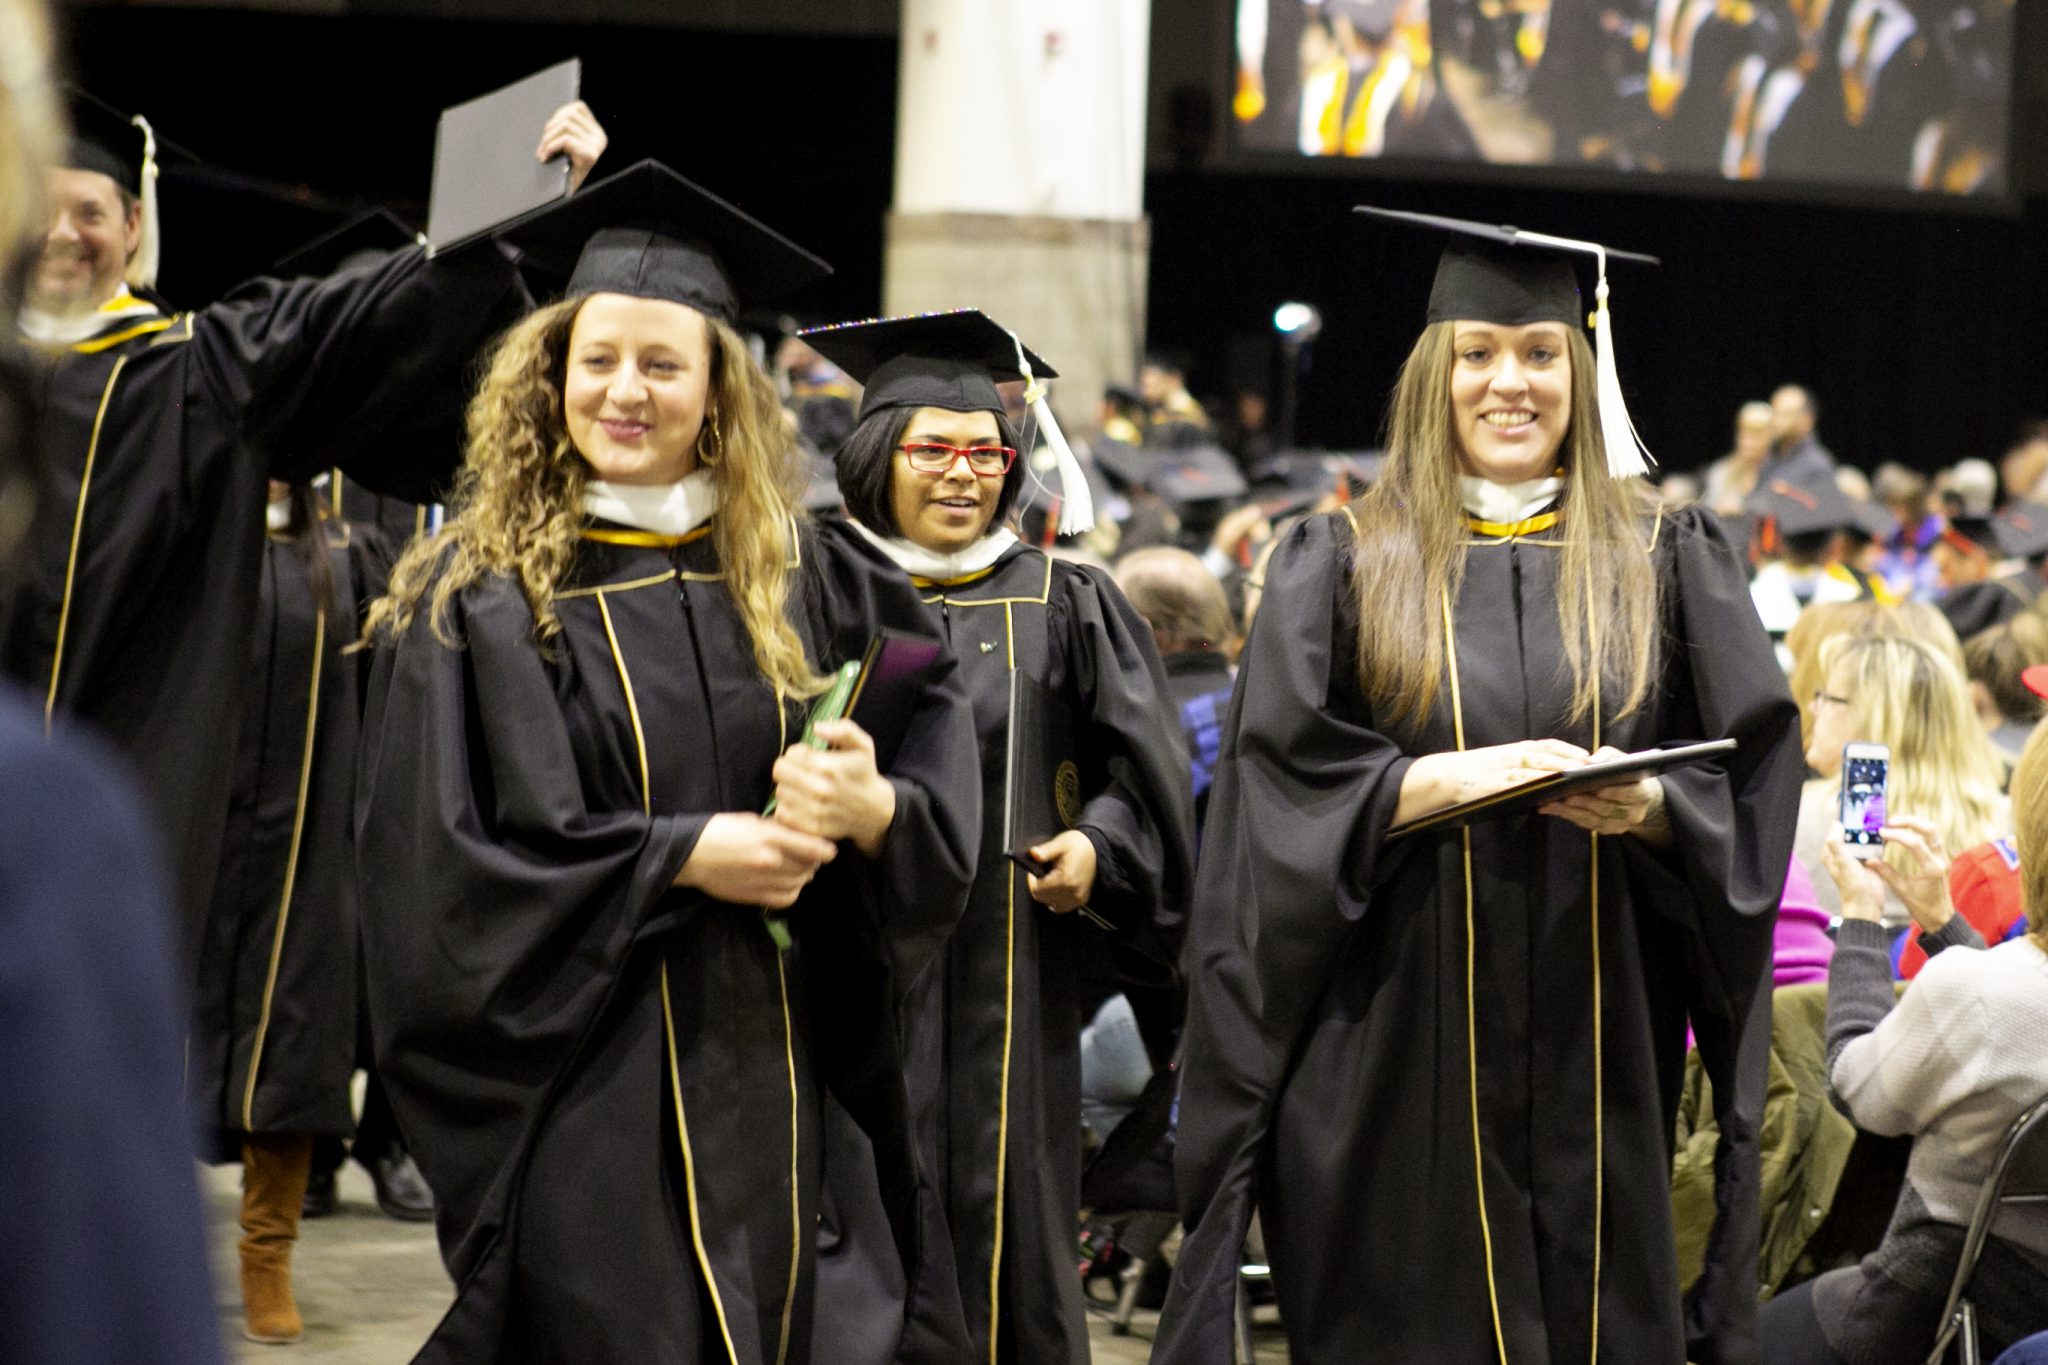 SEHD grads walking down isle after receiving diploma during fall commencement 2018